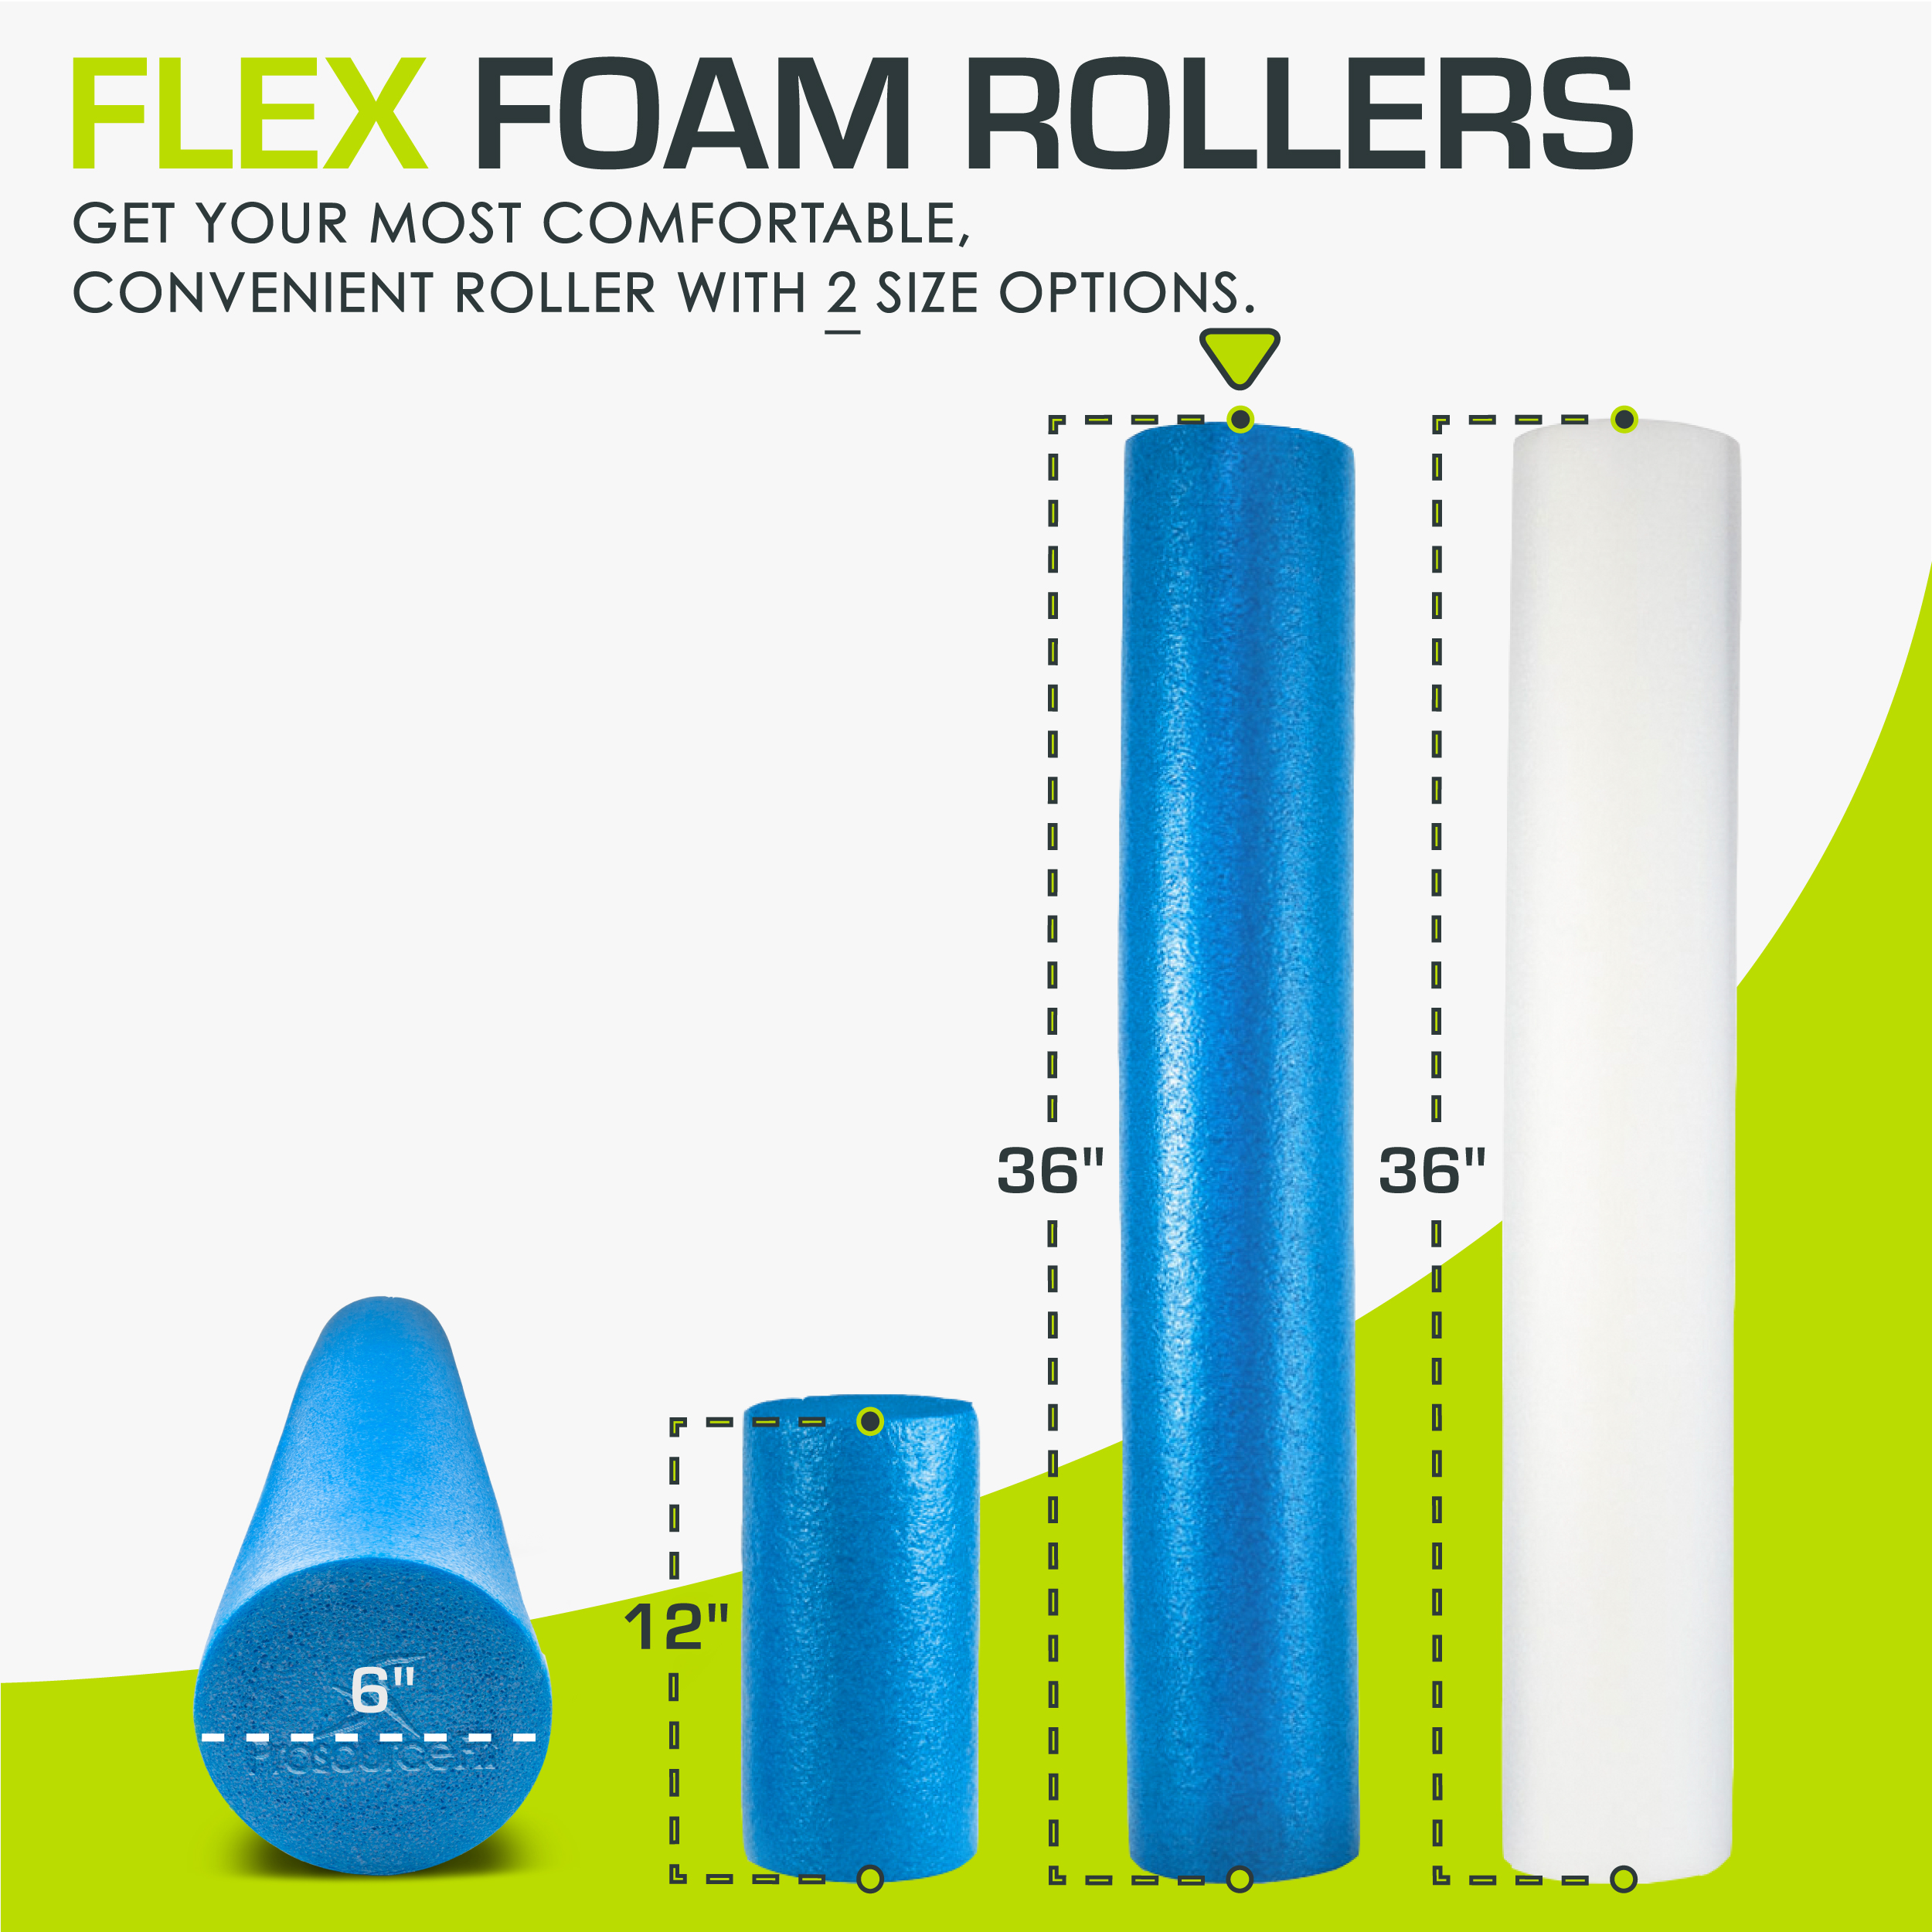 ProsourceFit Flex Foam Rollers, Full and Half, 36"L or 12"L for Muscle Therapy (MFR), Core Stabilization and Balance Exercises - image 2 of 7